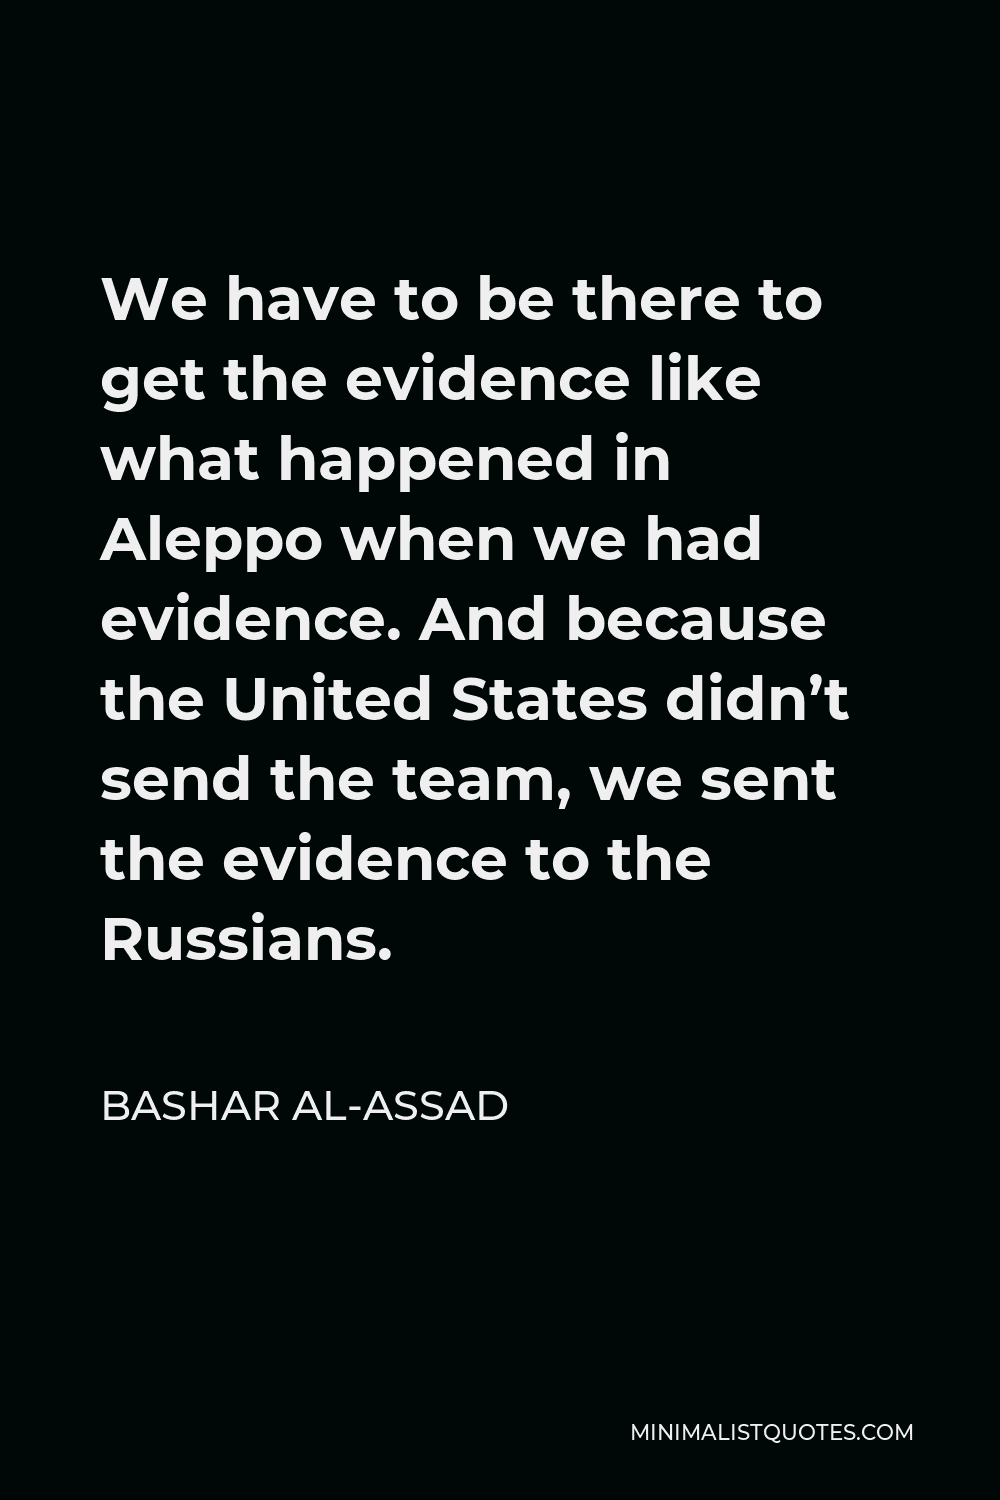 Bashar al-Assad Quote - We have to be there to get the evidence like what happened in Aleppo when we had evidence. And because the United States didn’t send the team, we sent the evidence to the Russians.